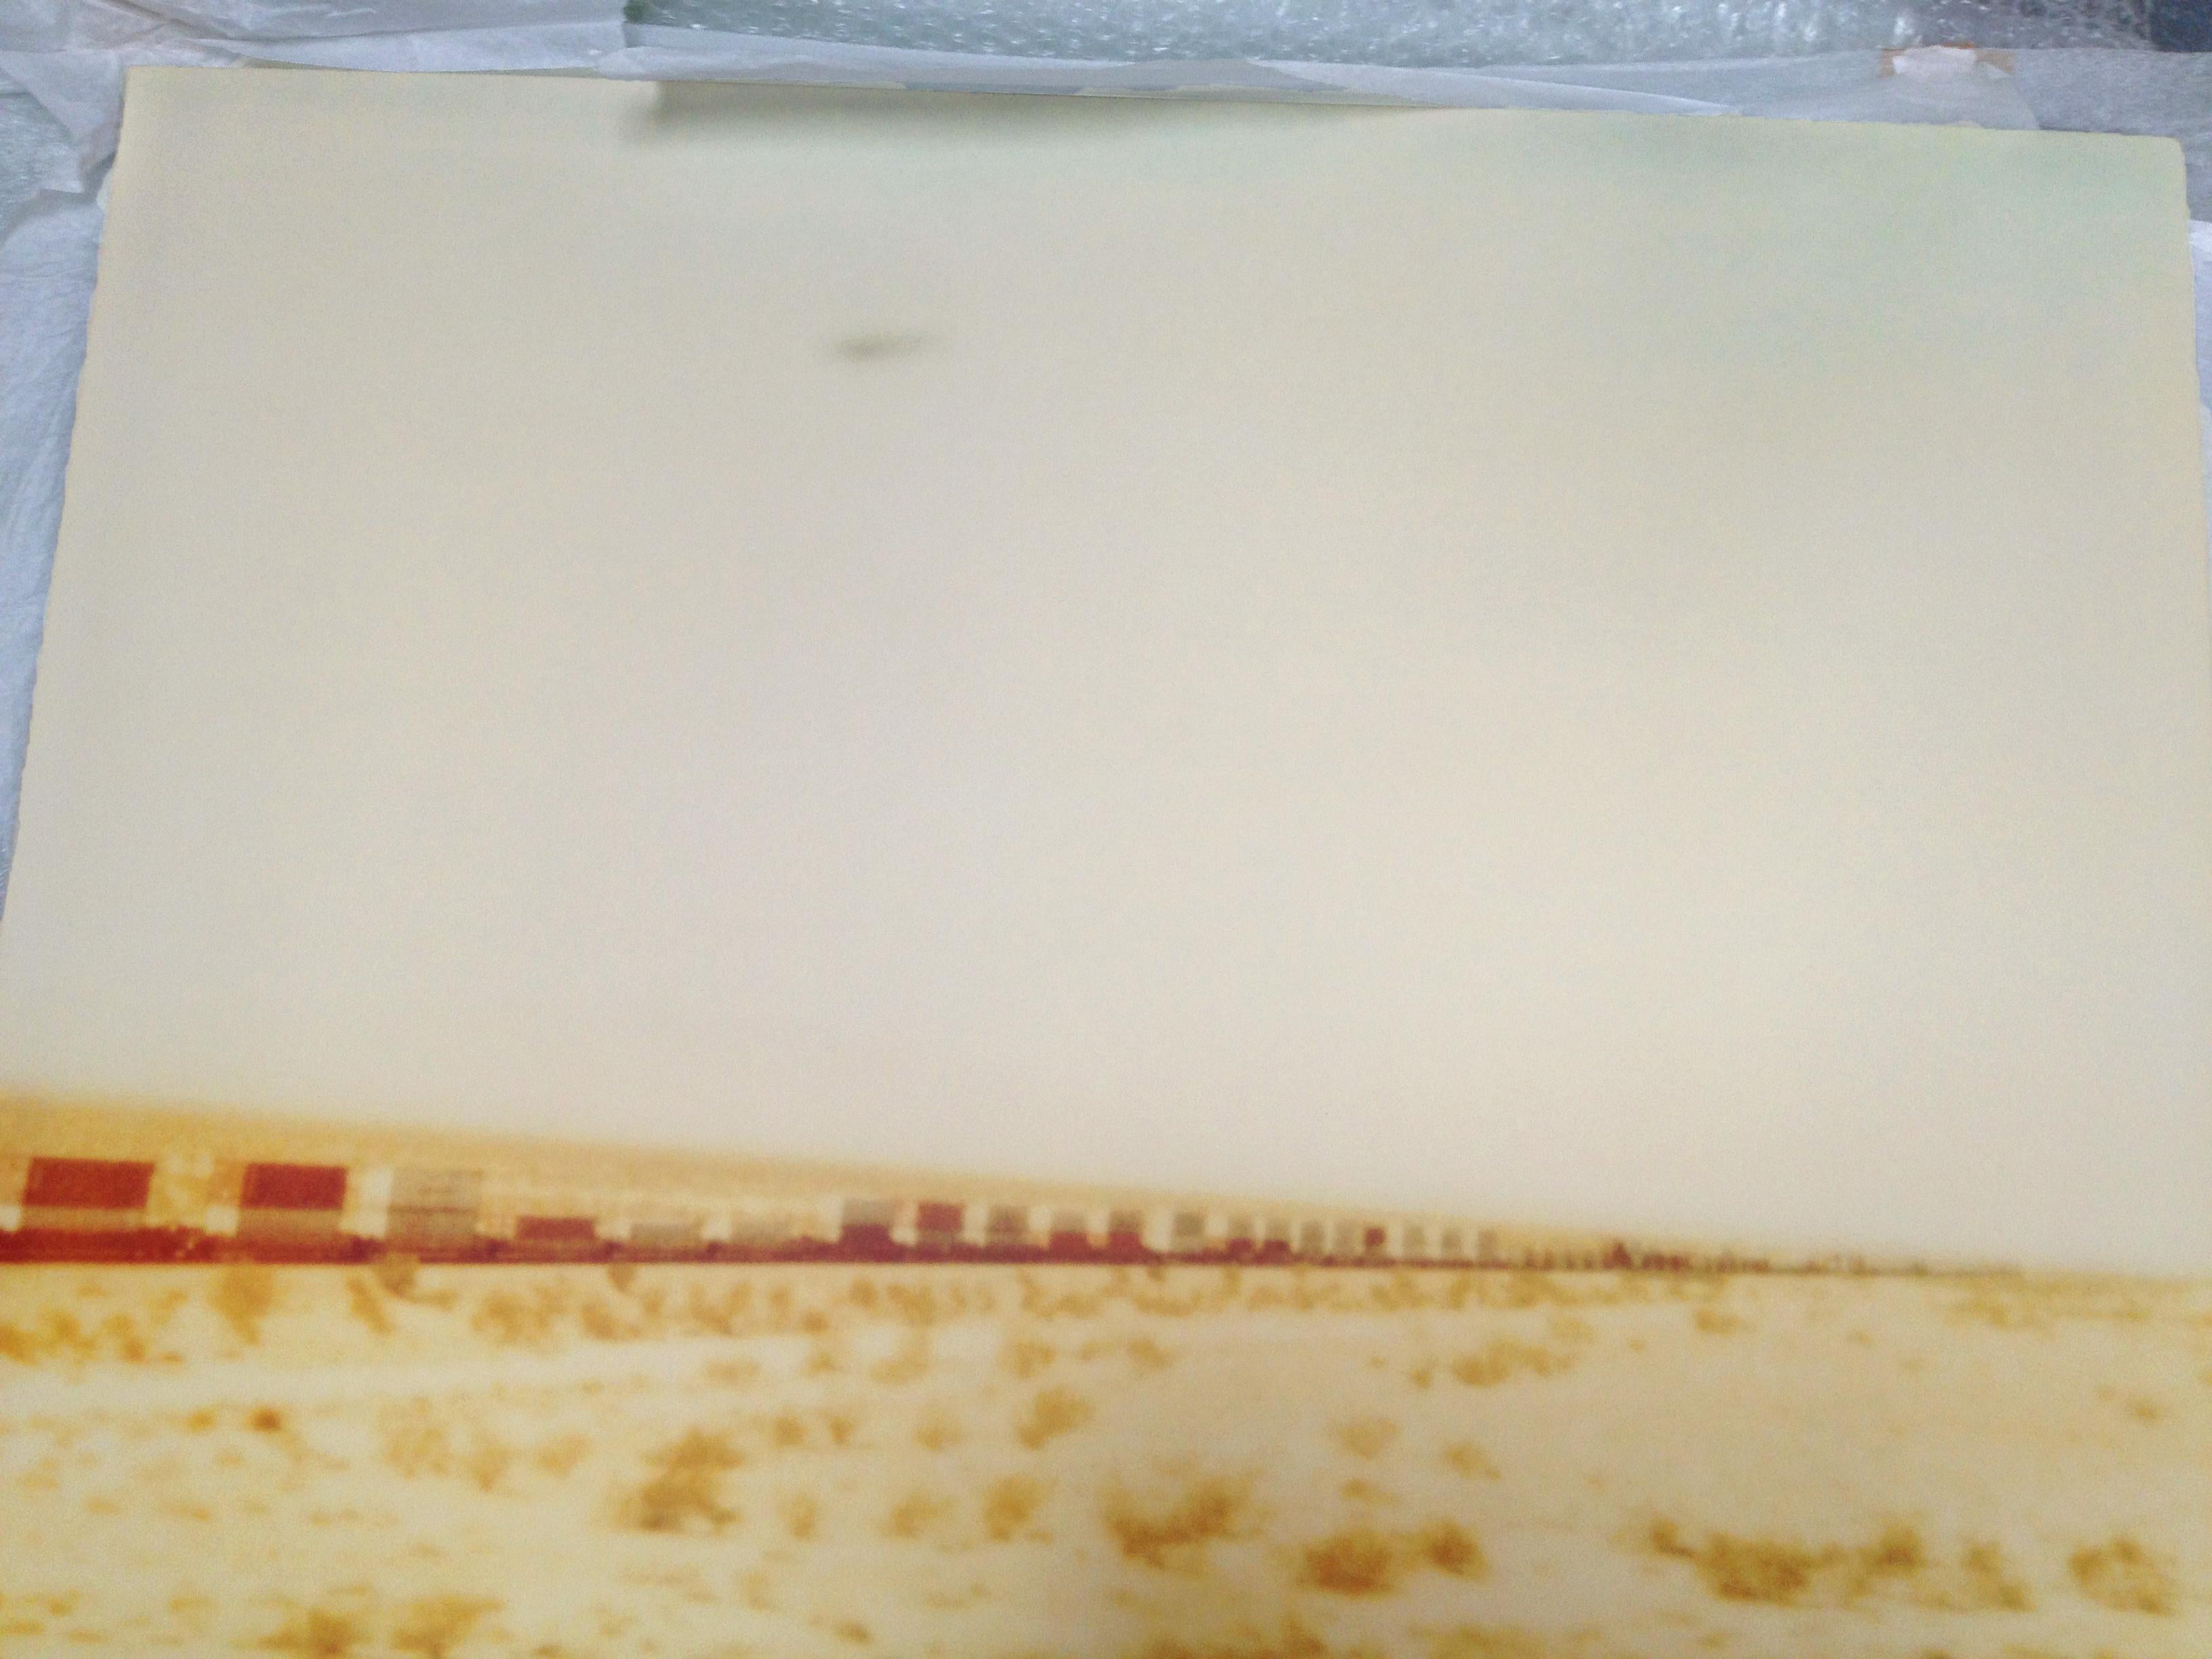 Train crosses Plain (Wastelands) - analog hand-print, mounted - Polaroid, Color - Contemporary Photograph by Stefanie Schneider